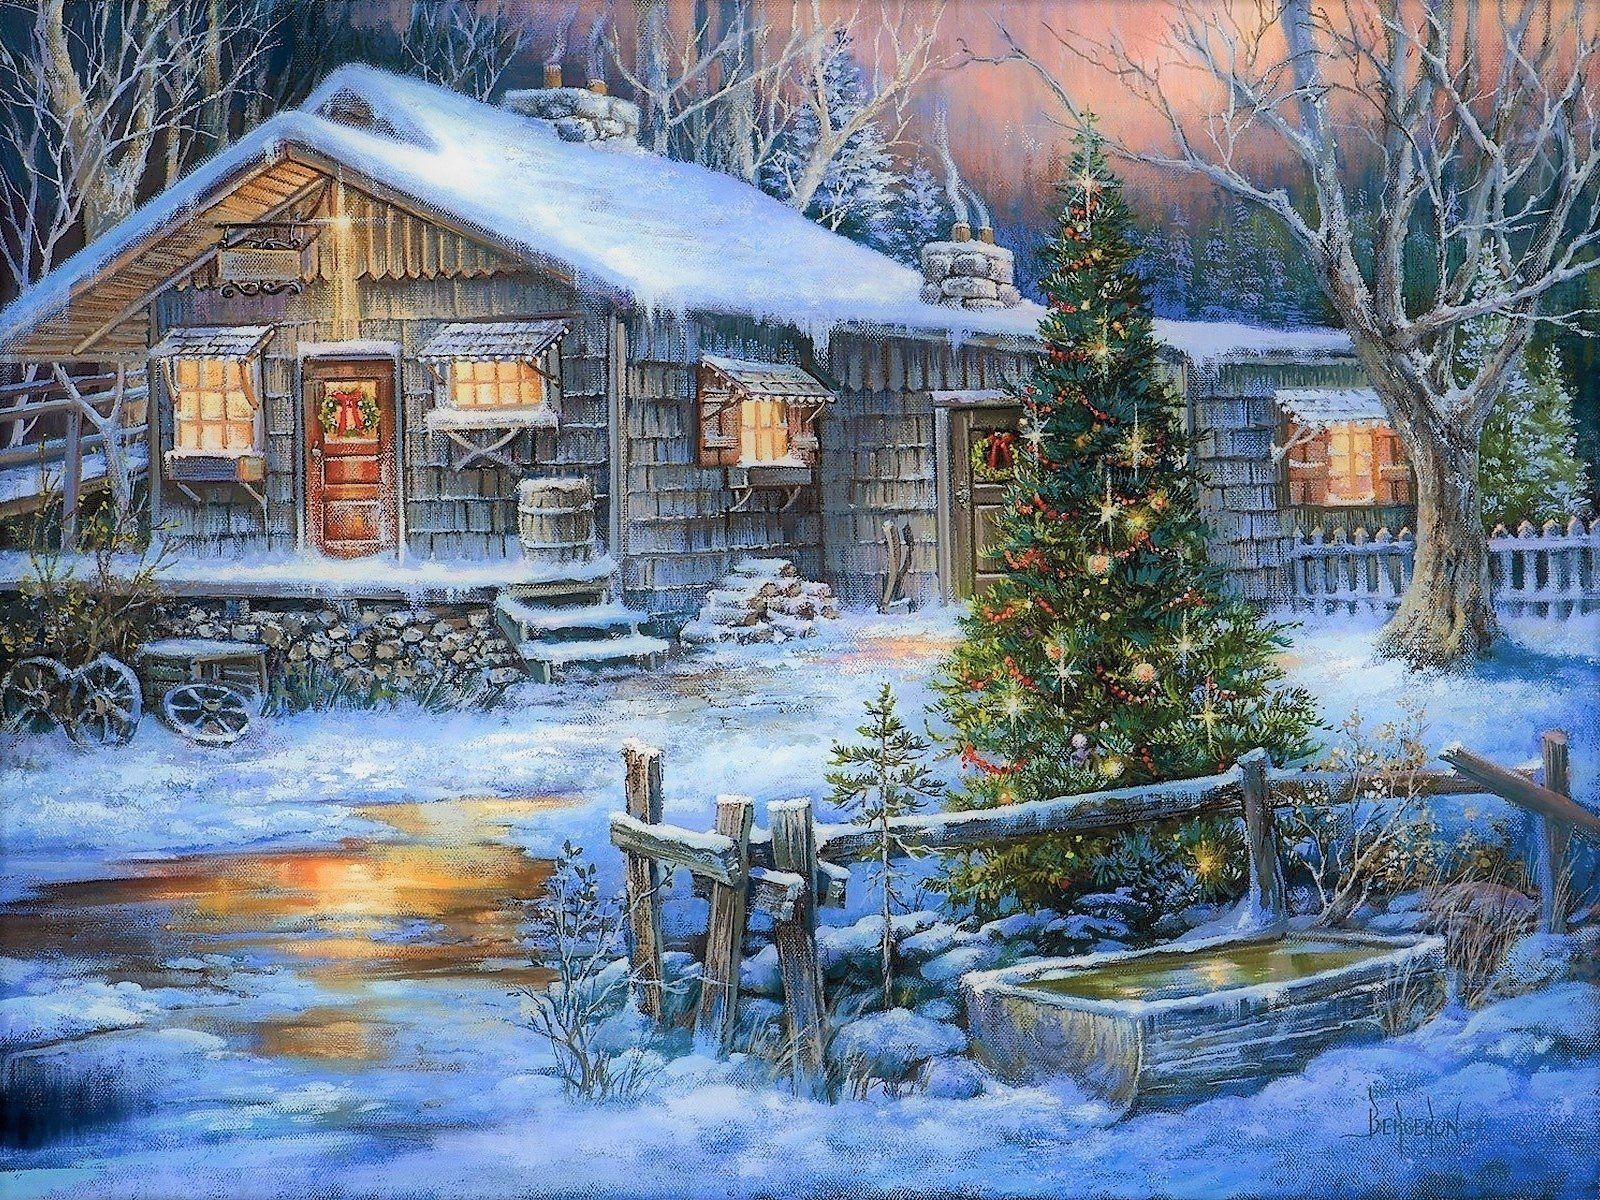 1600x1200 A Country Christmas Wallpaper and Background Image on WallpaperBa...